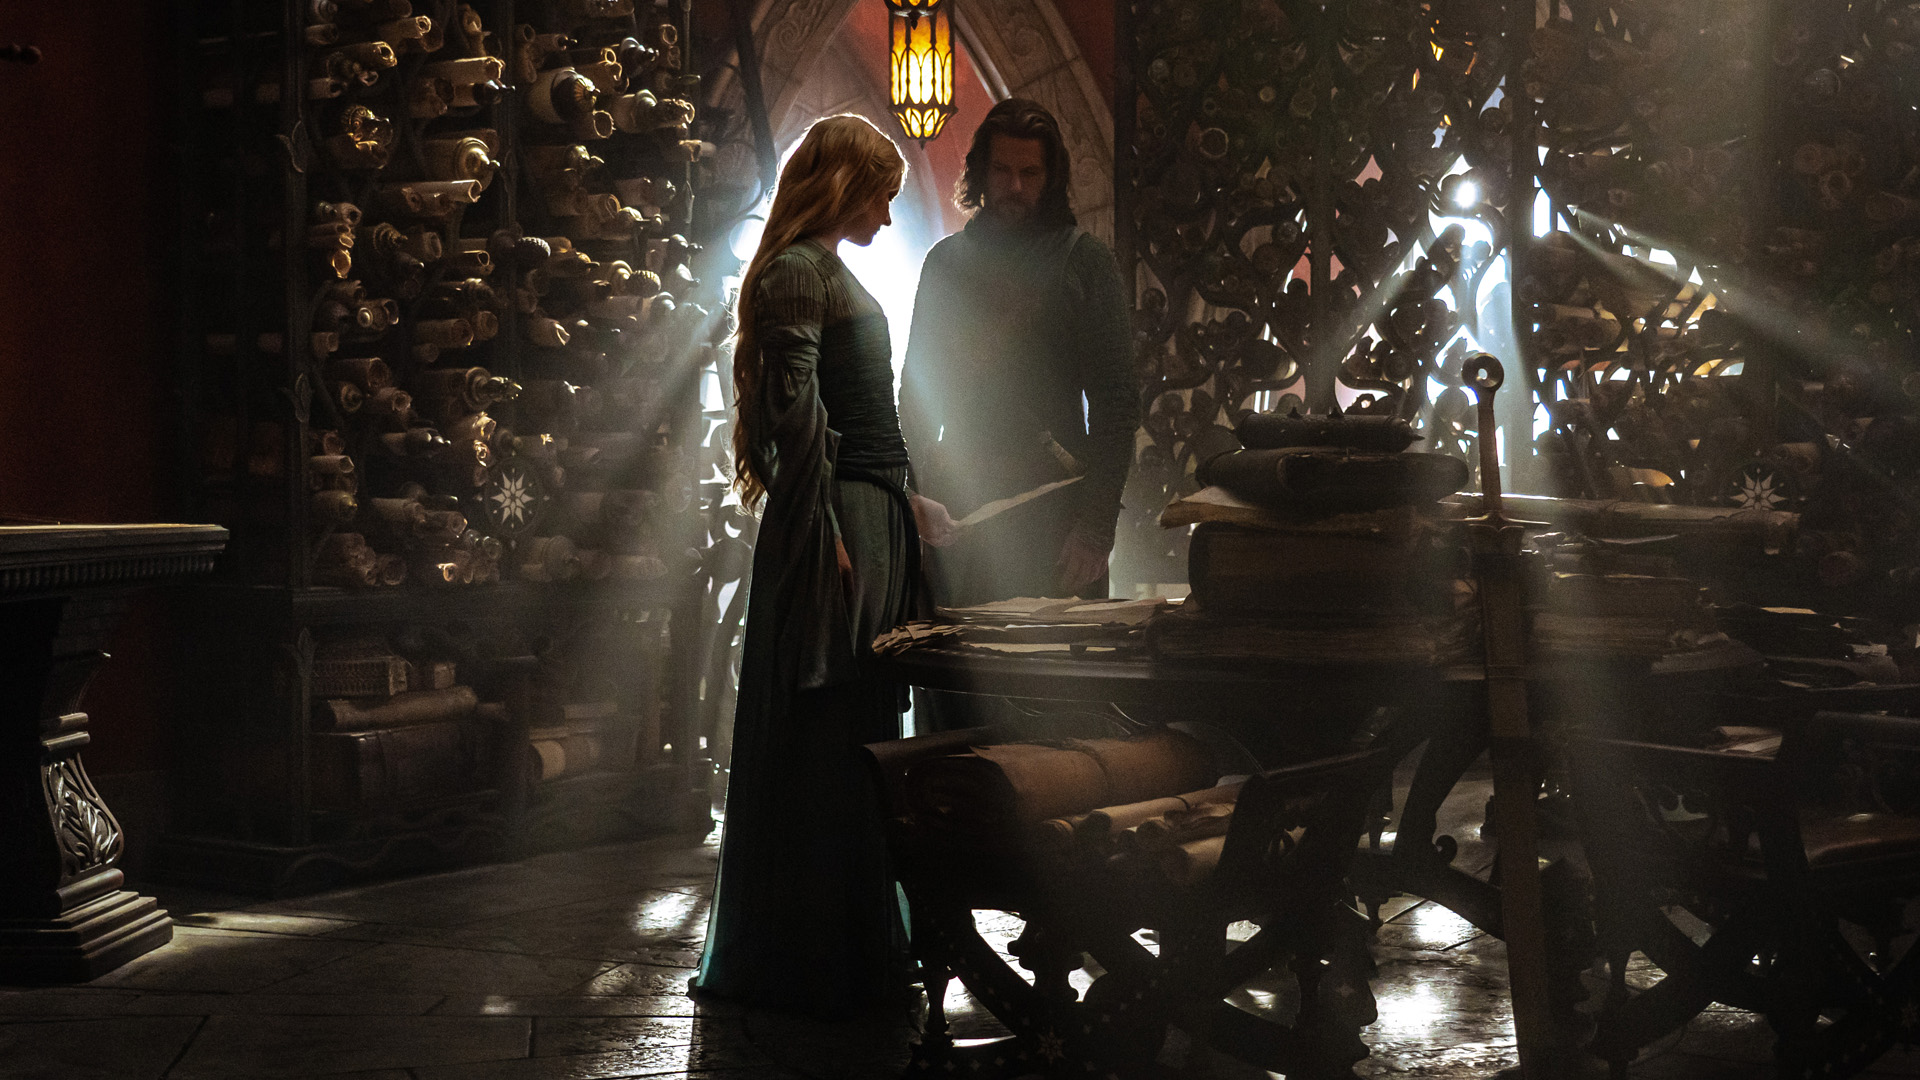 Galadriel and Elendil look at documents in Númenor's Hall of Law in The Rings of Power episode 3